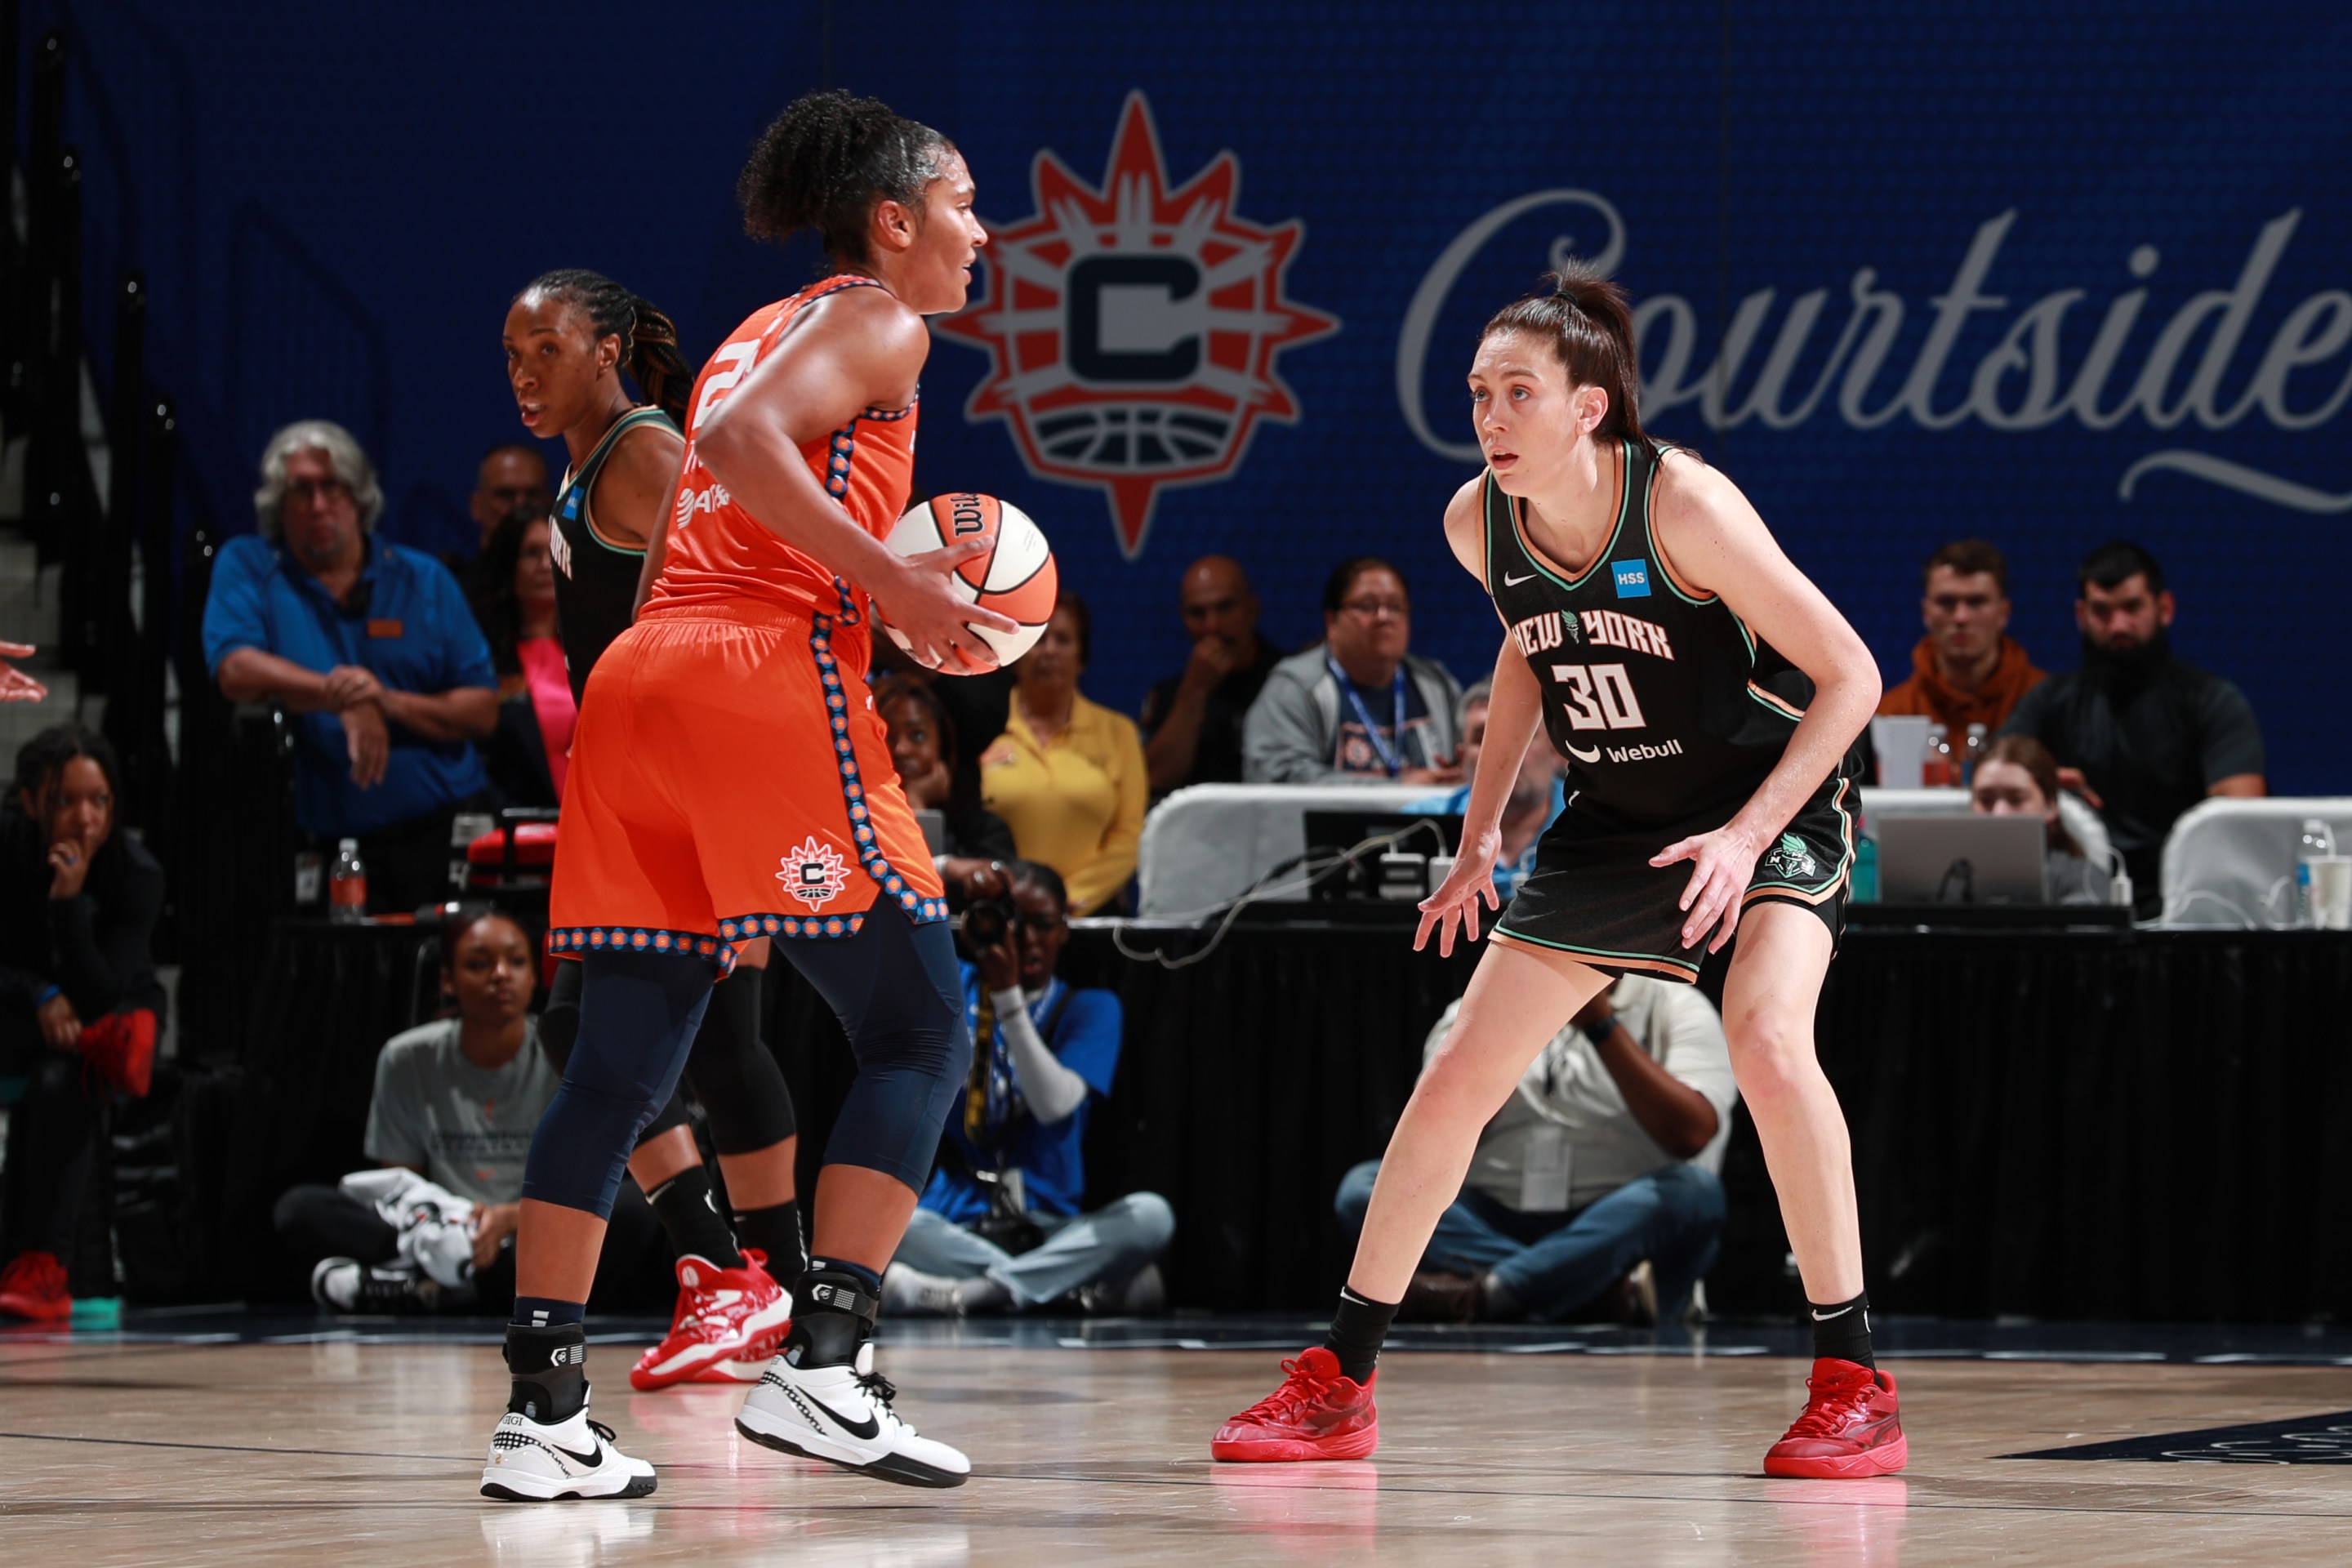 Breanna Stewart #30 of the New York Liberty plays defense during the game against the Connecticut Sun on August 24, 2023 at the Mohegan Sun Arena in Uncasville, Connecticut.